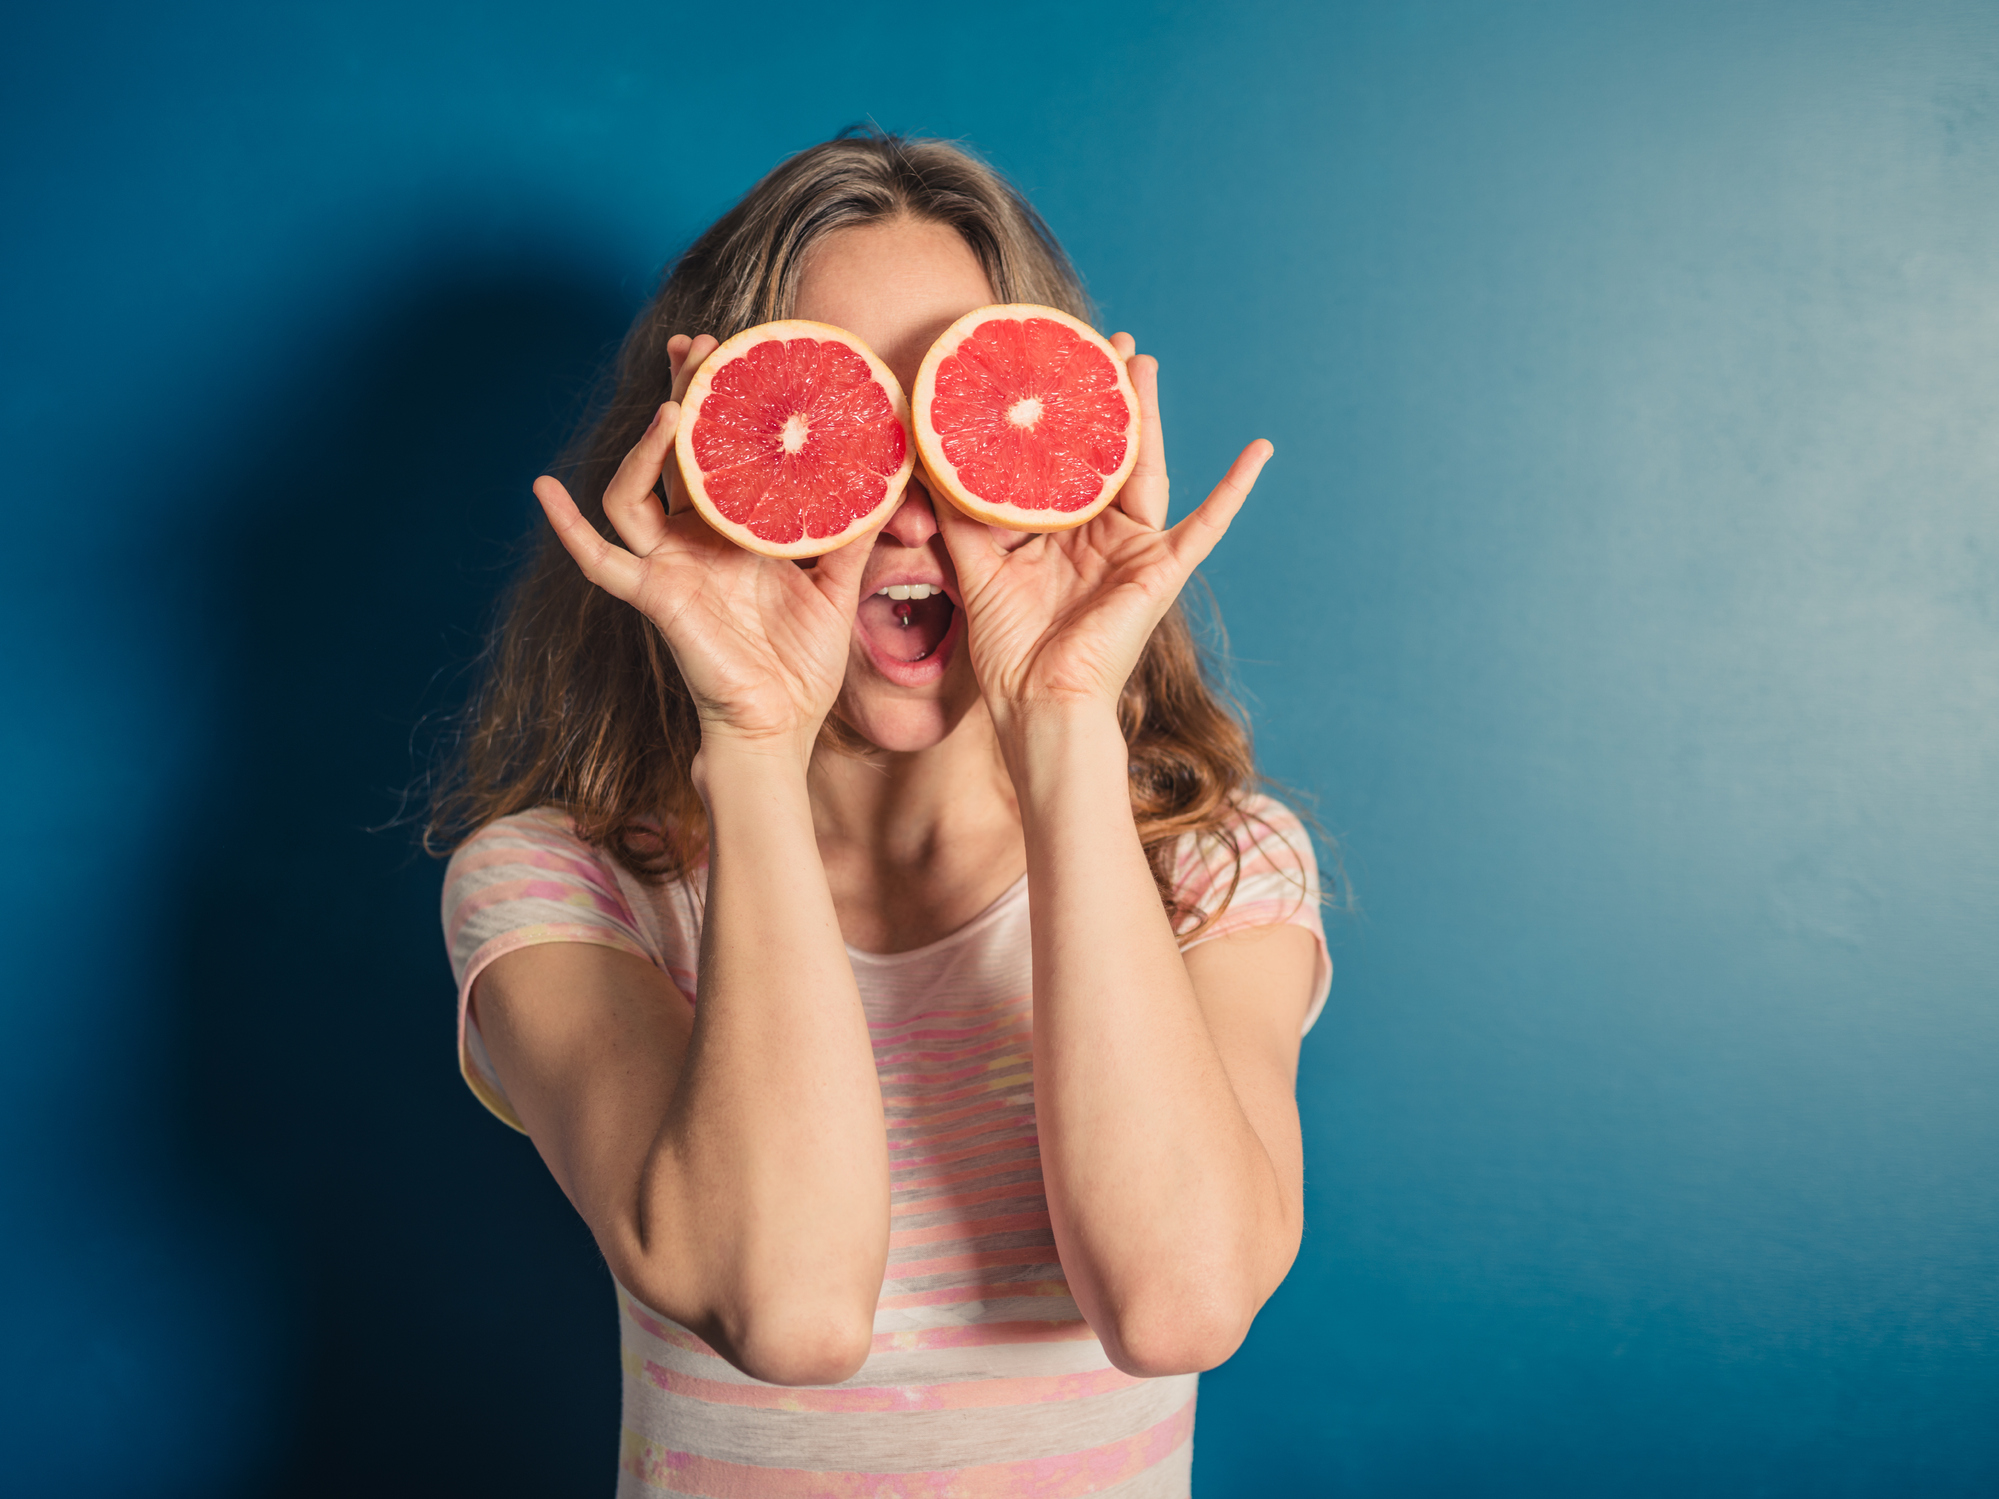 A woman holding sliced grapefruit over her eyes as if they were a pair of glasses.